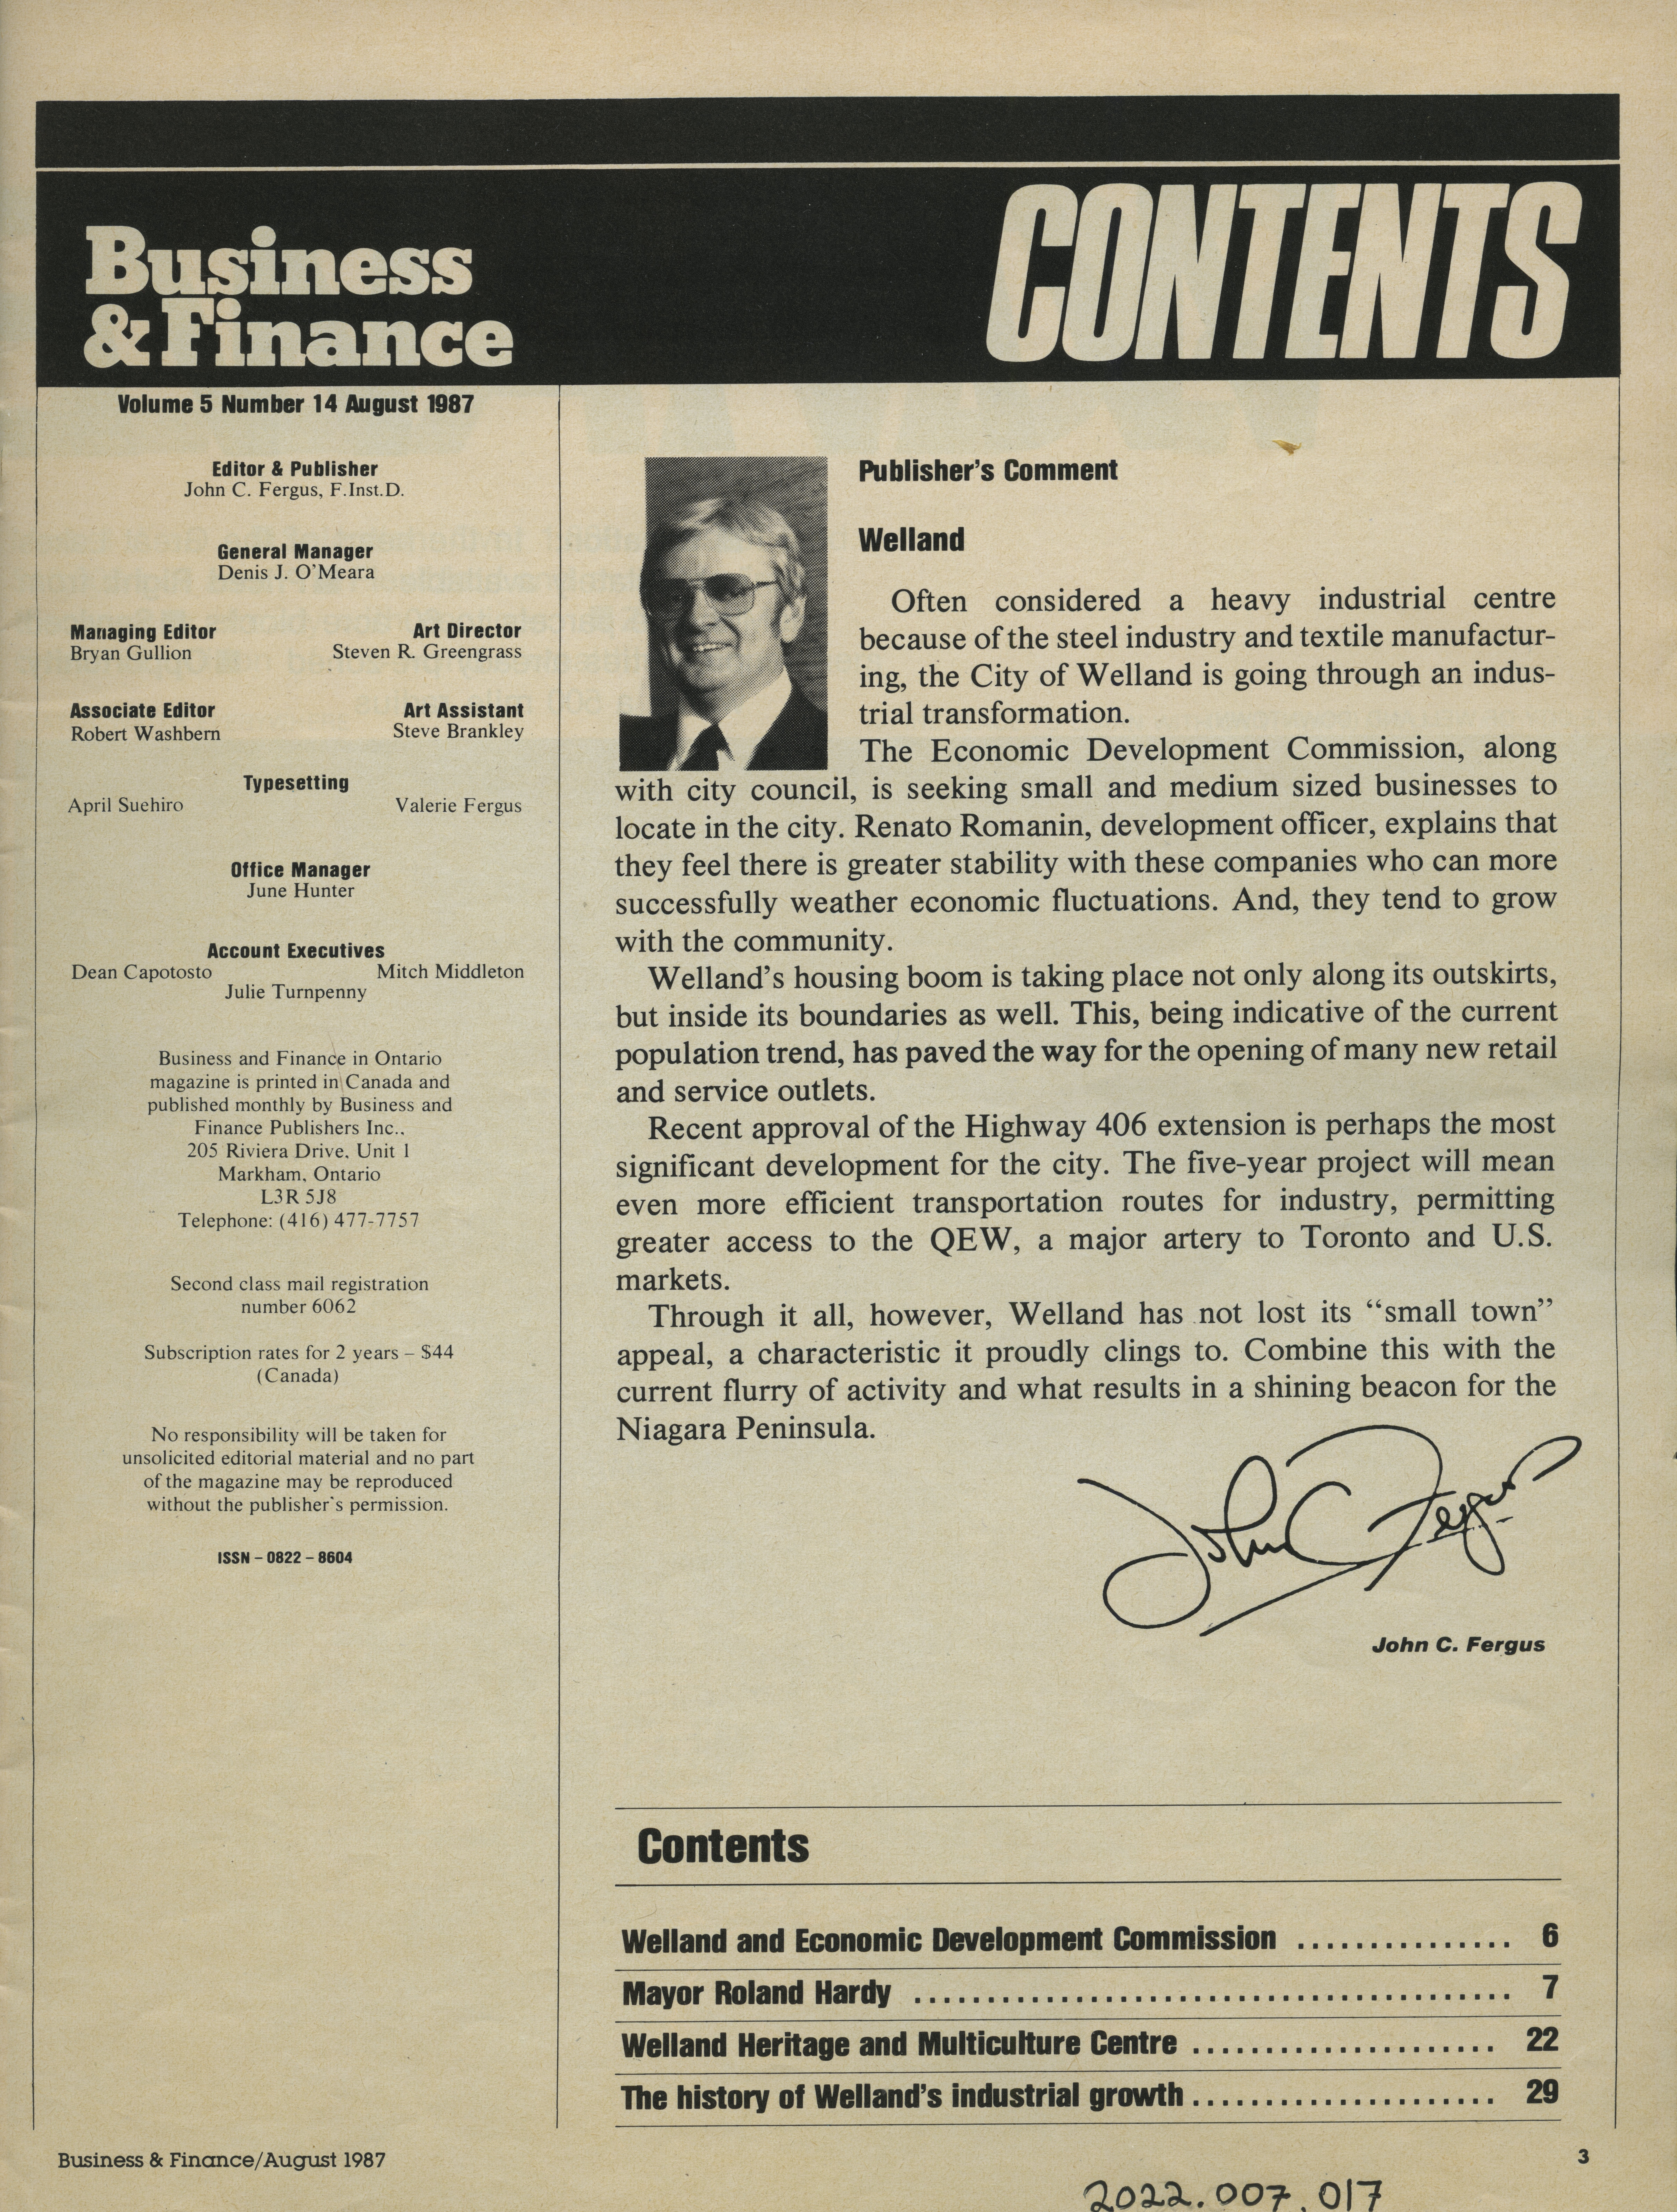 A page of the magazine with the publisher's note. It has a small black and white portrait, and the publisher's signature at the bottom.